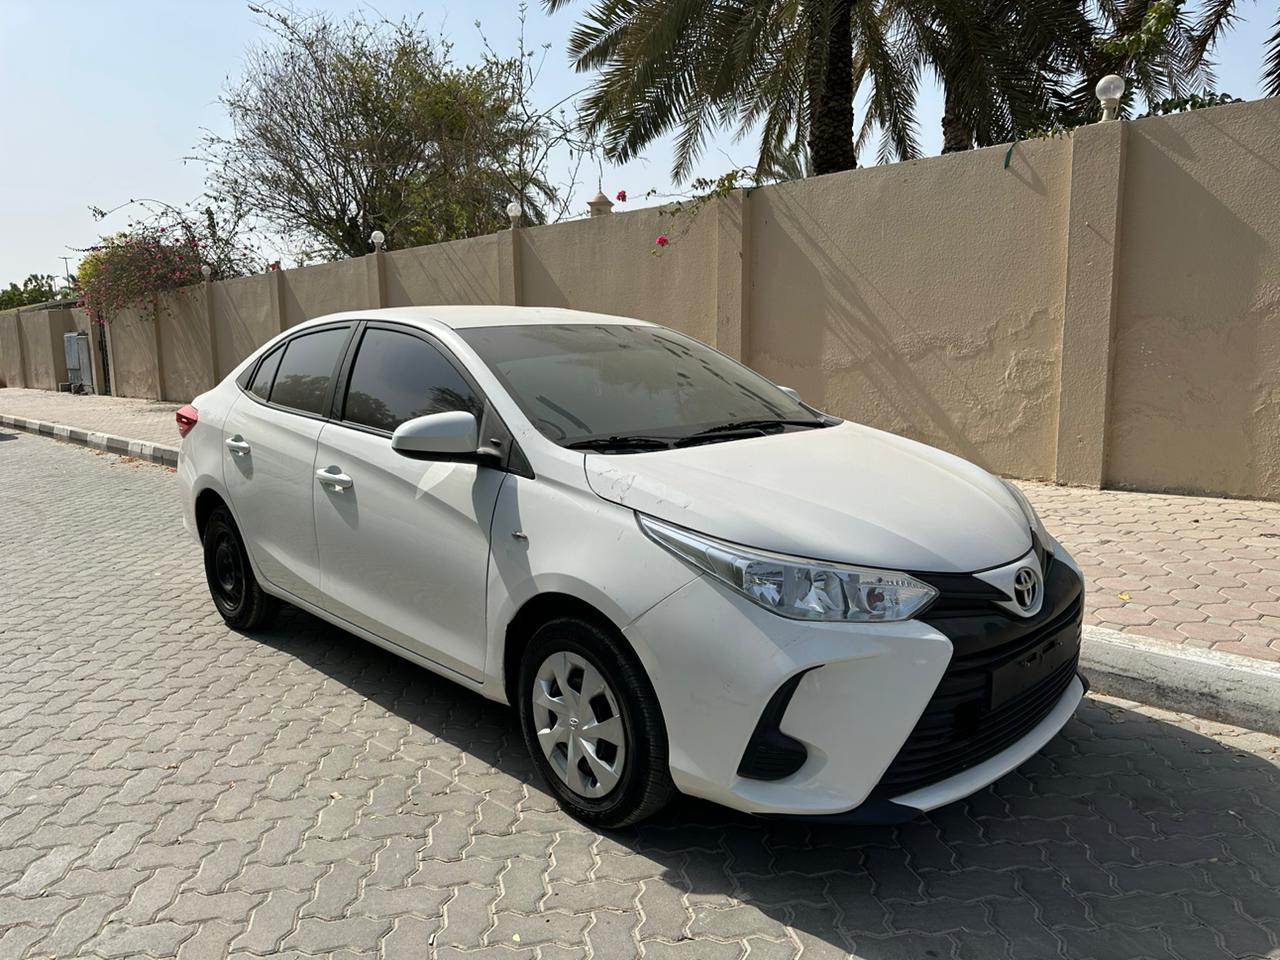 Toyota MODEL YEAR:2021 for sale-pic_4